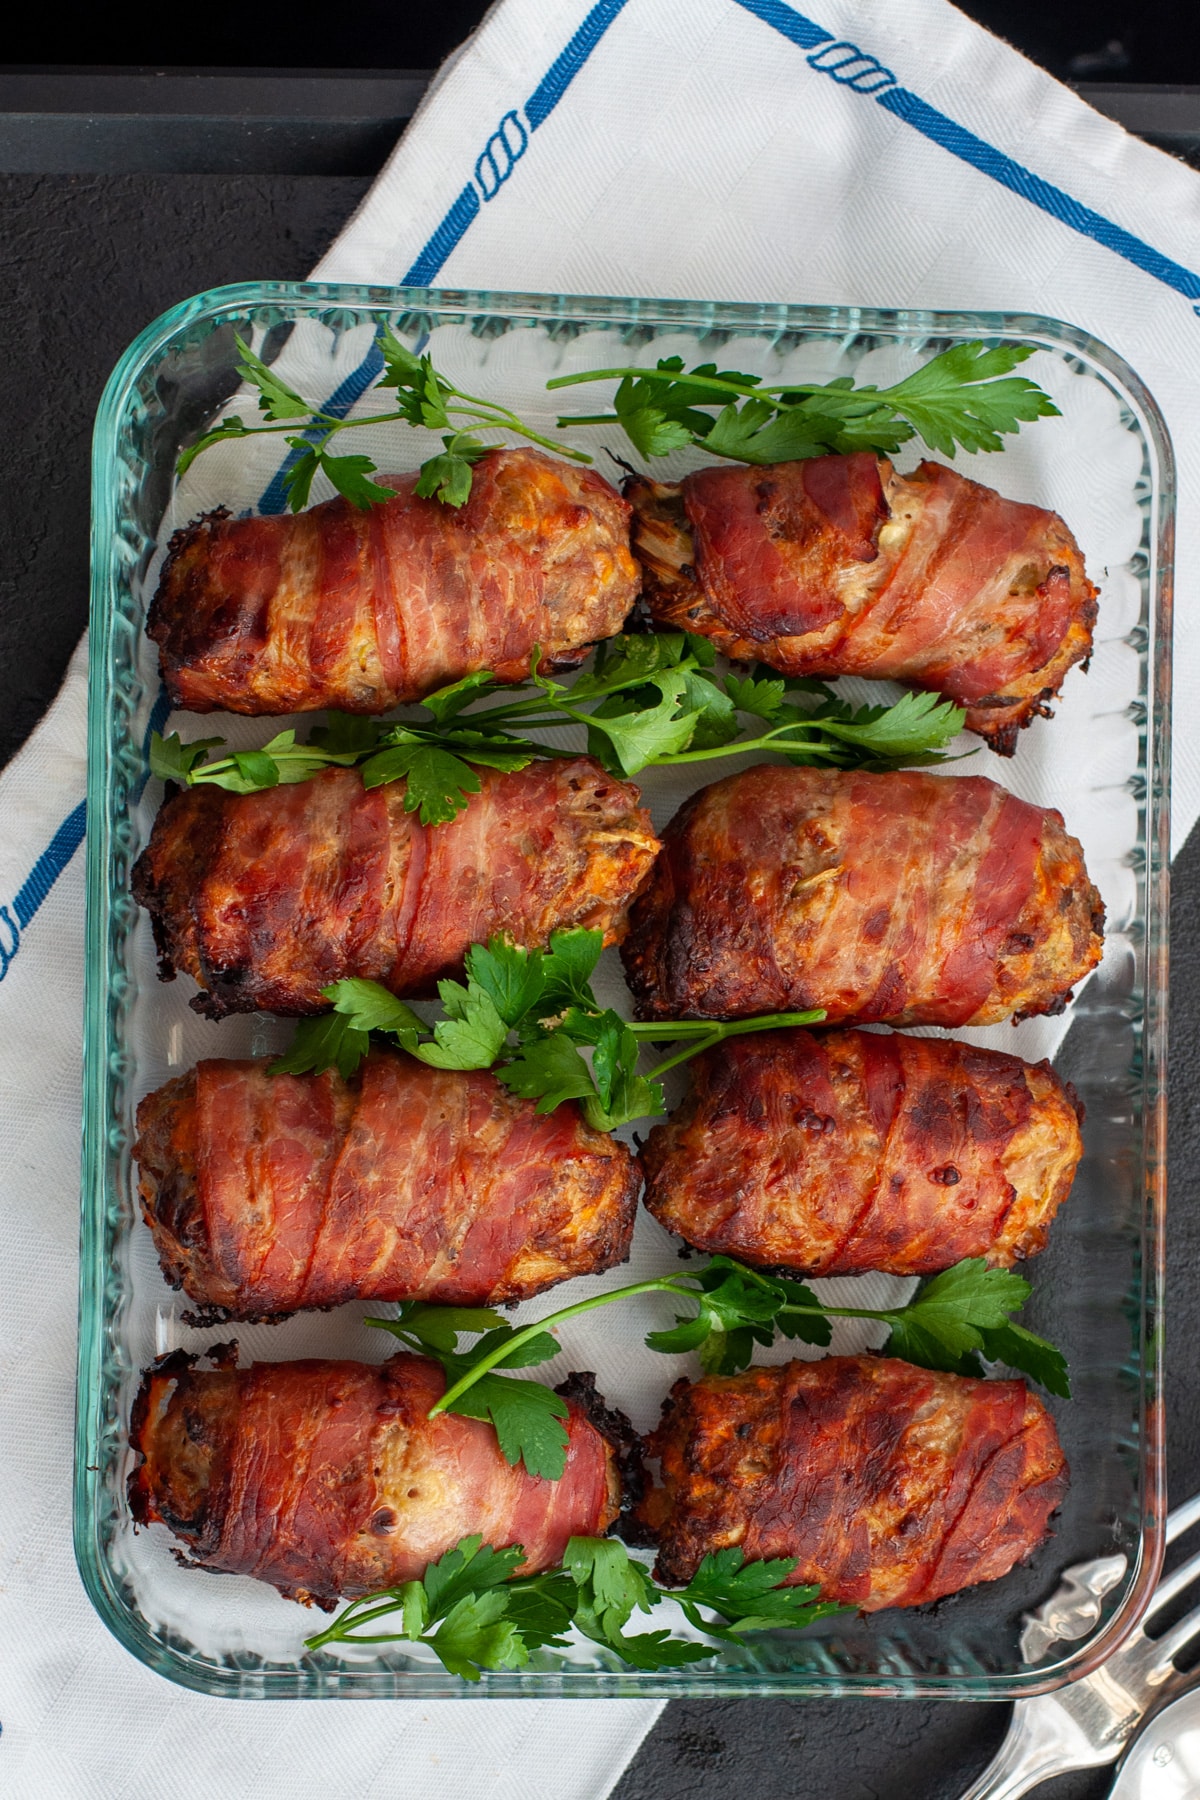 Italian sausage stuffing recipe wrapped in bacon